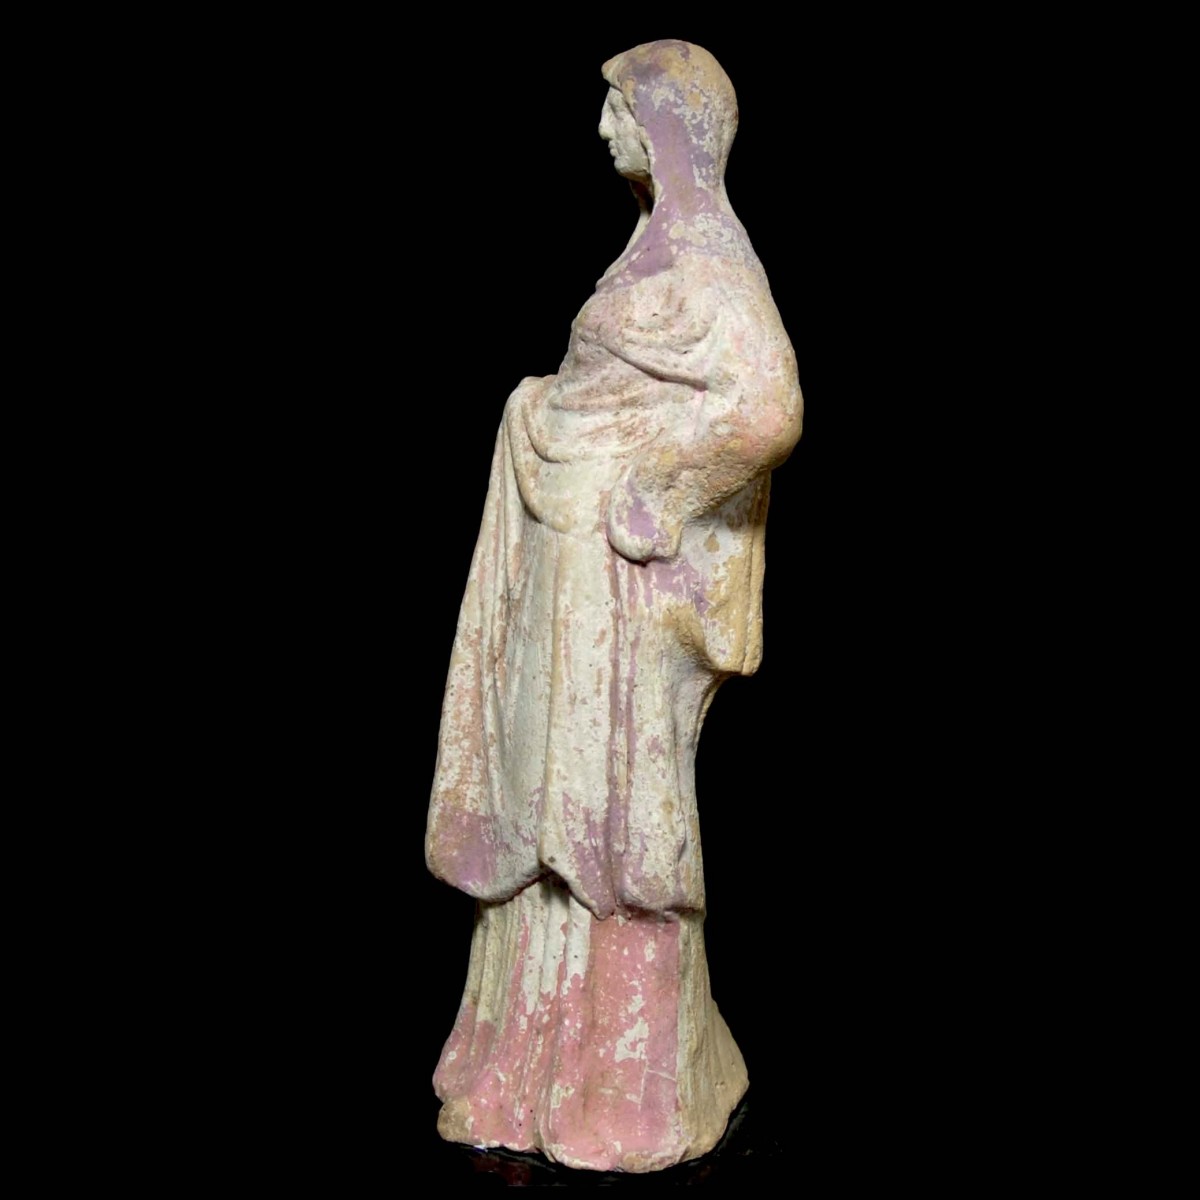 Hellenistic terracotta statuette of a woman from Canosa left